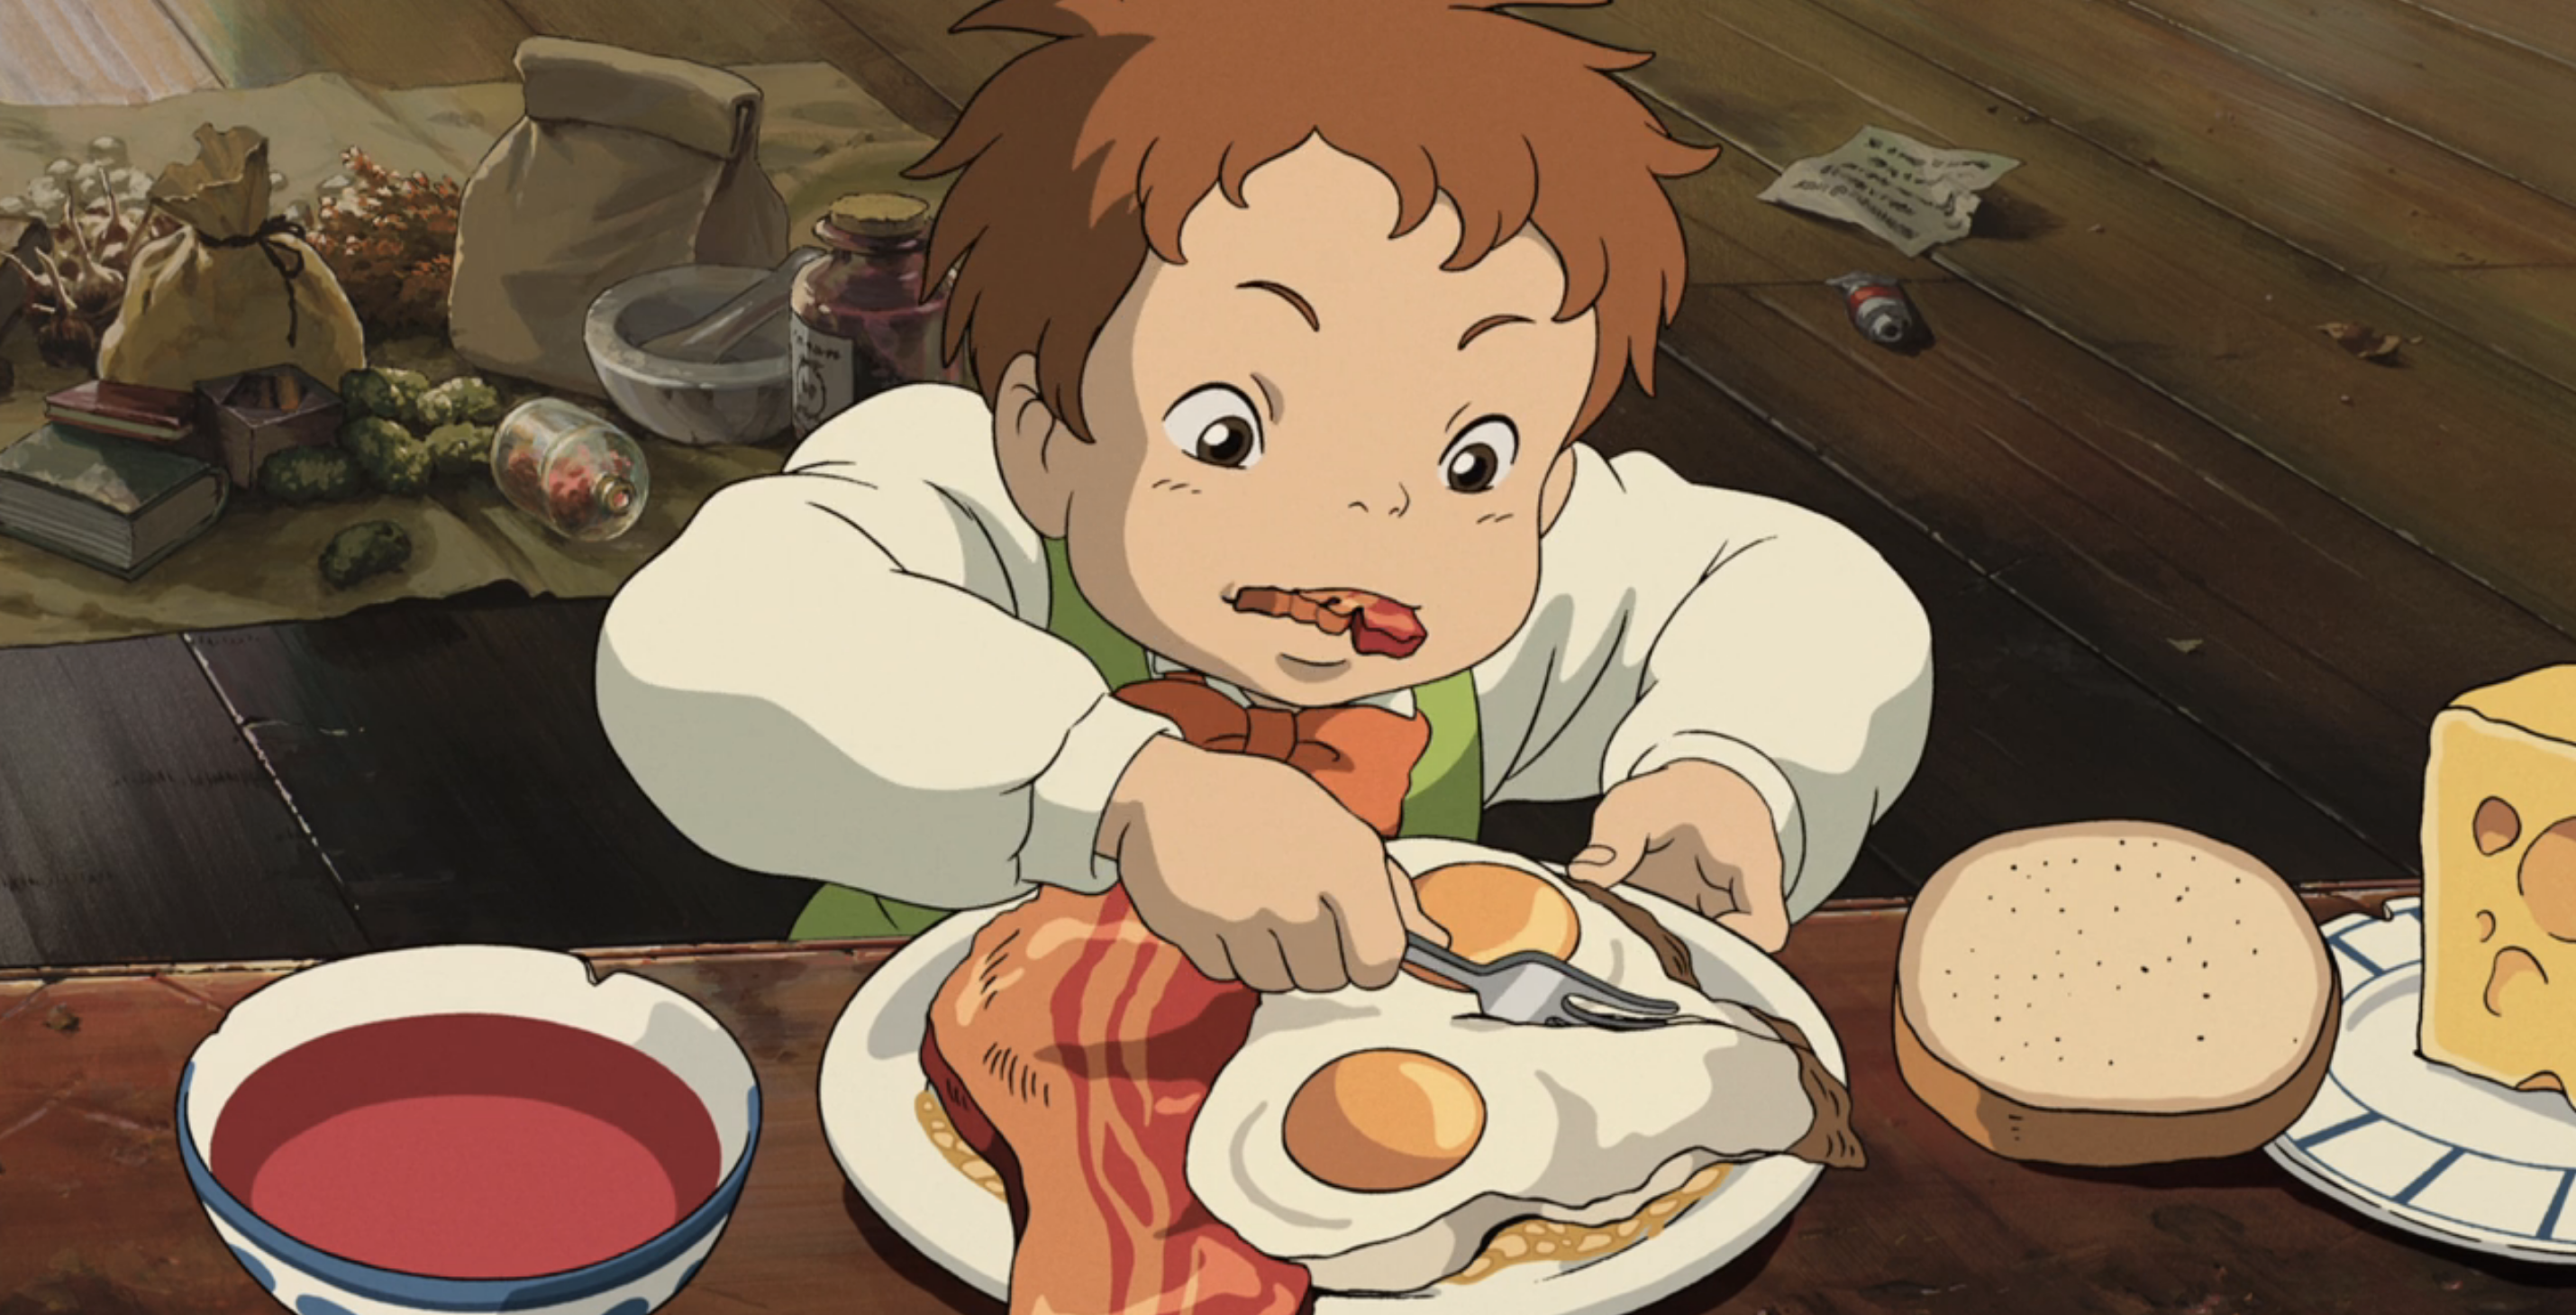 A young red-haired boy chews on a chunk of thick bacon while cutting up his lovingly detailed sunny-side-up eggs with a fork in a scene from Studio Ghibli’s Howl’s Moving Castle